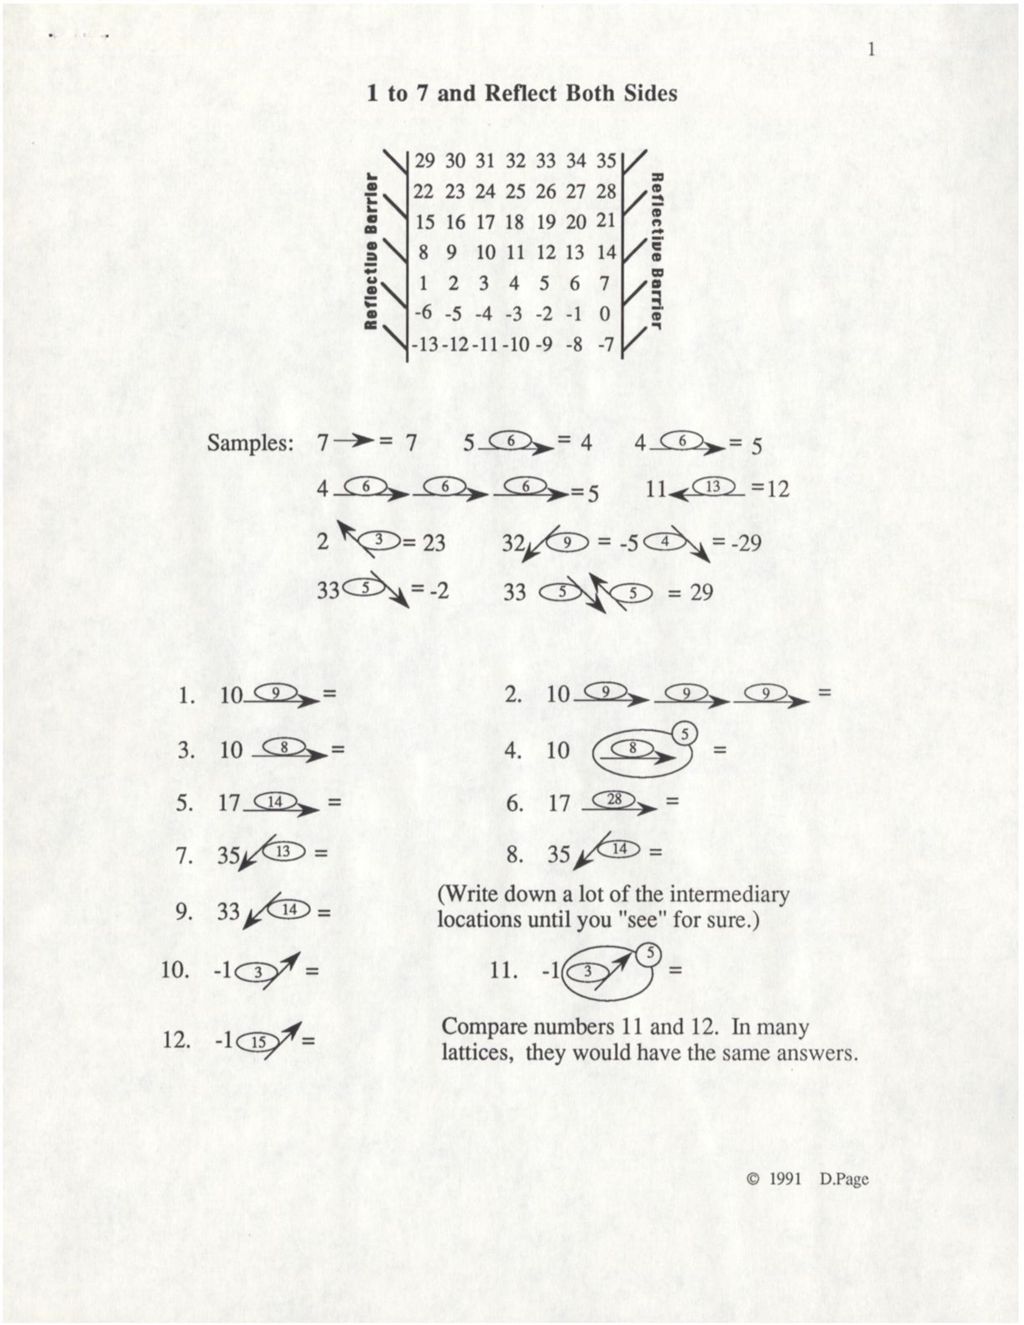 1 to 7 and Reflect Both Sides (7 lattice, examples, problems, Answer Key) (1991)